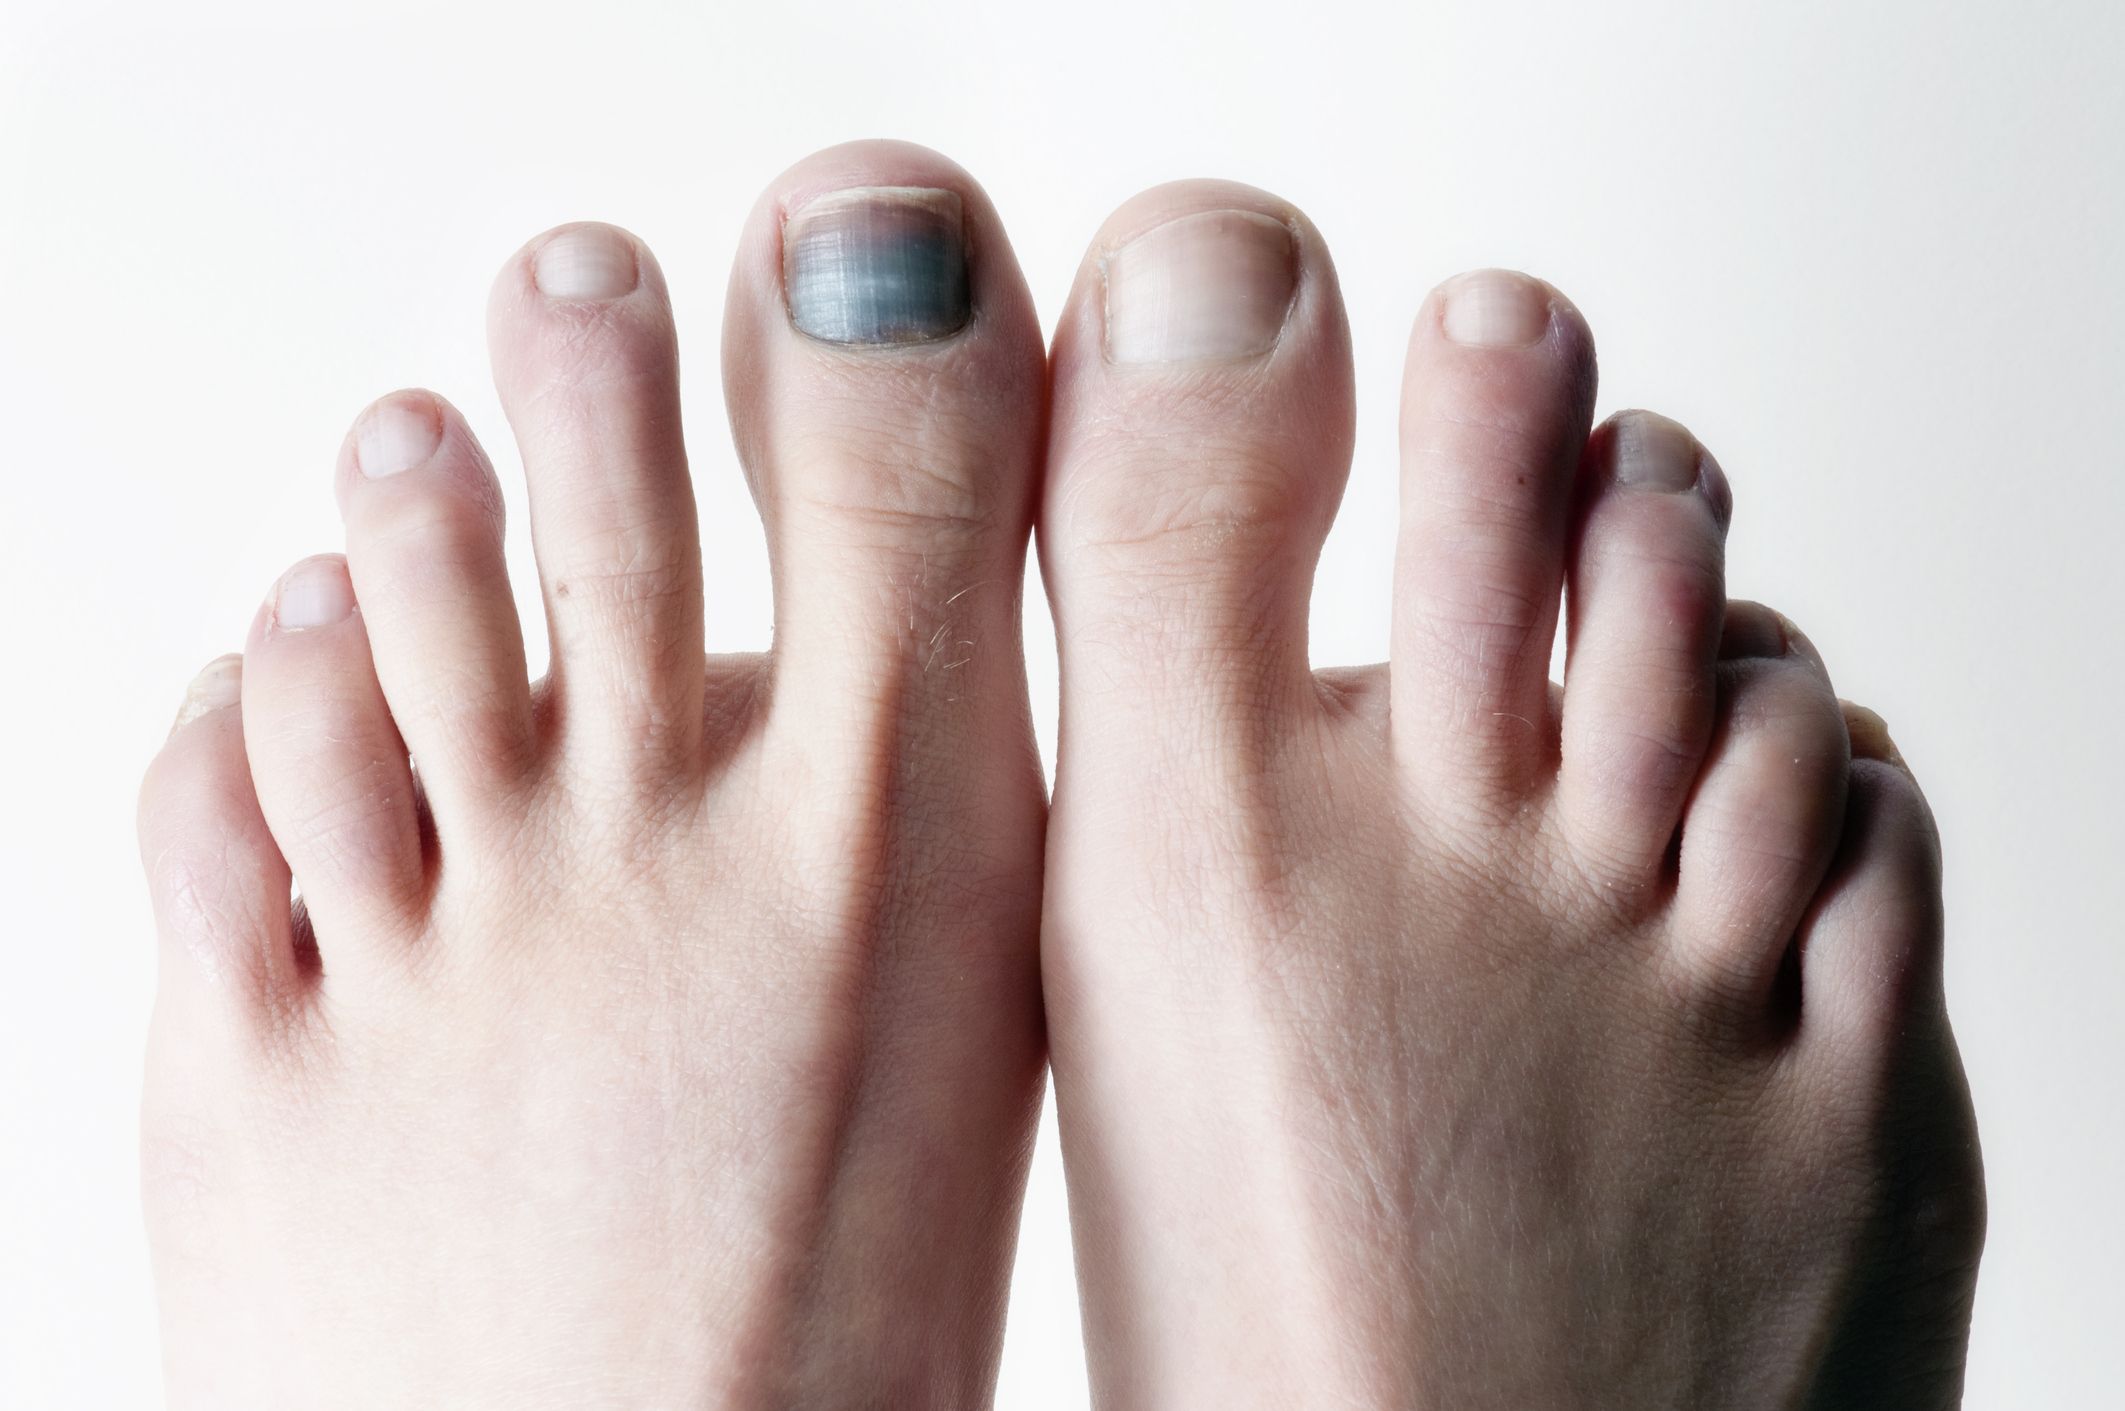 How Do You Get Rid Of Dark Spots On The Toes? – My FootDr